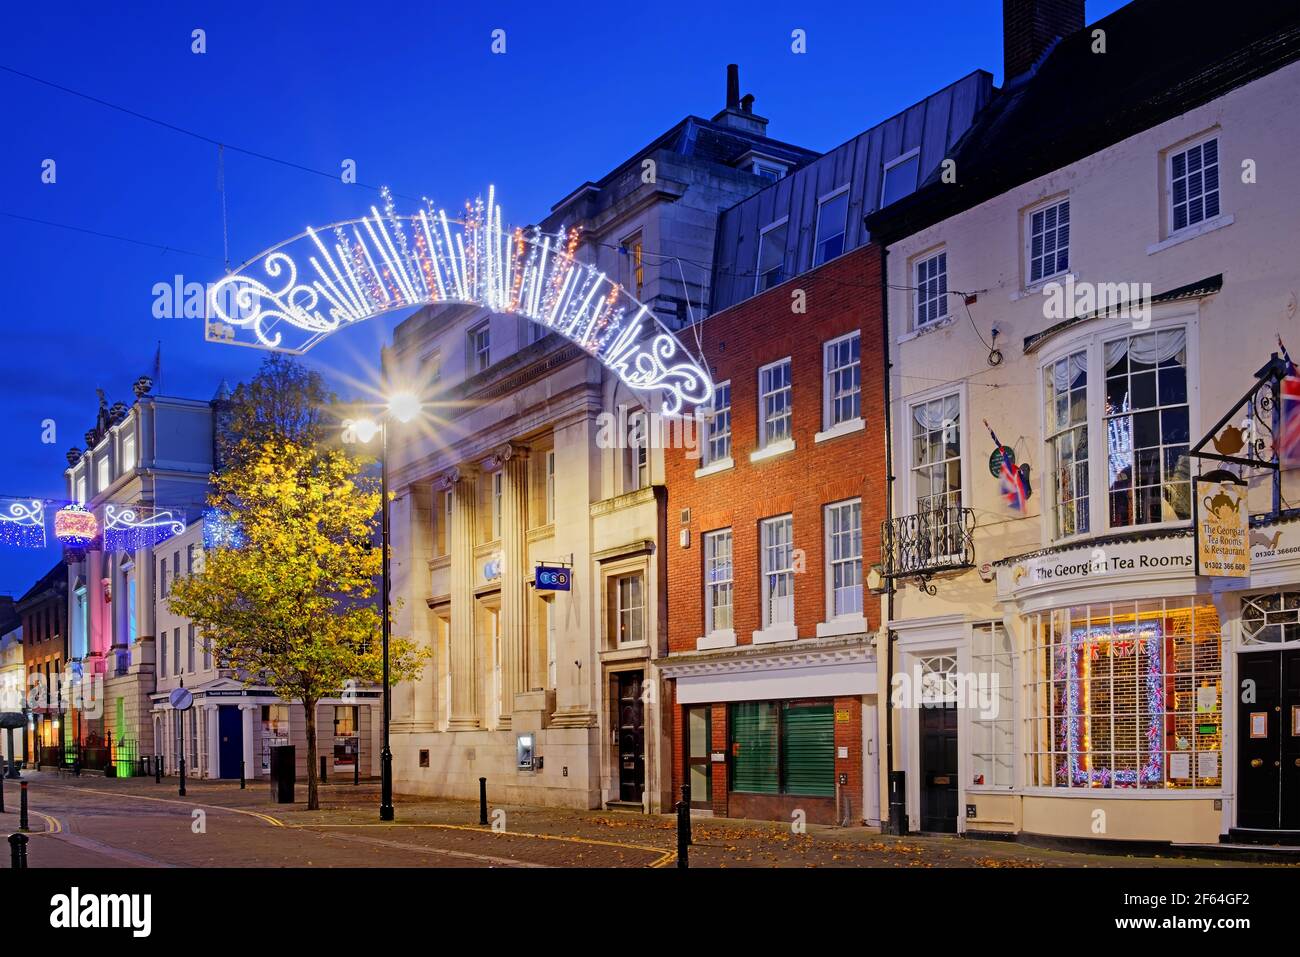 UK, South Yorkshire, Doncaster, Mansion House and High Street buildings with Christmas Illuminations. Stock Photo